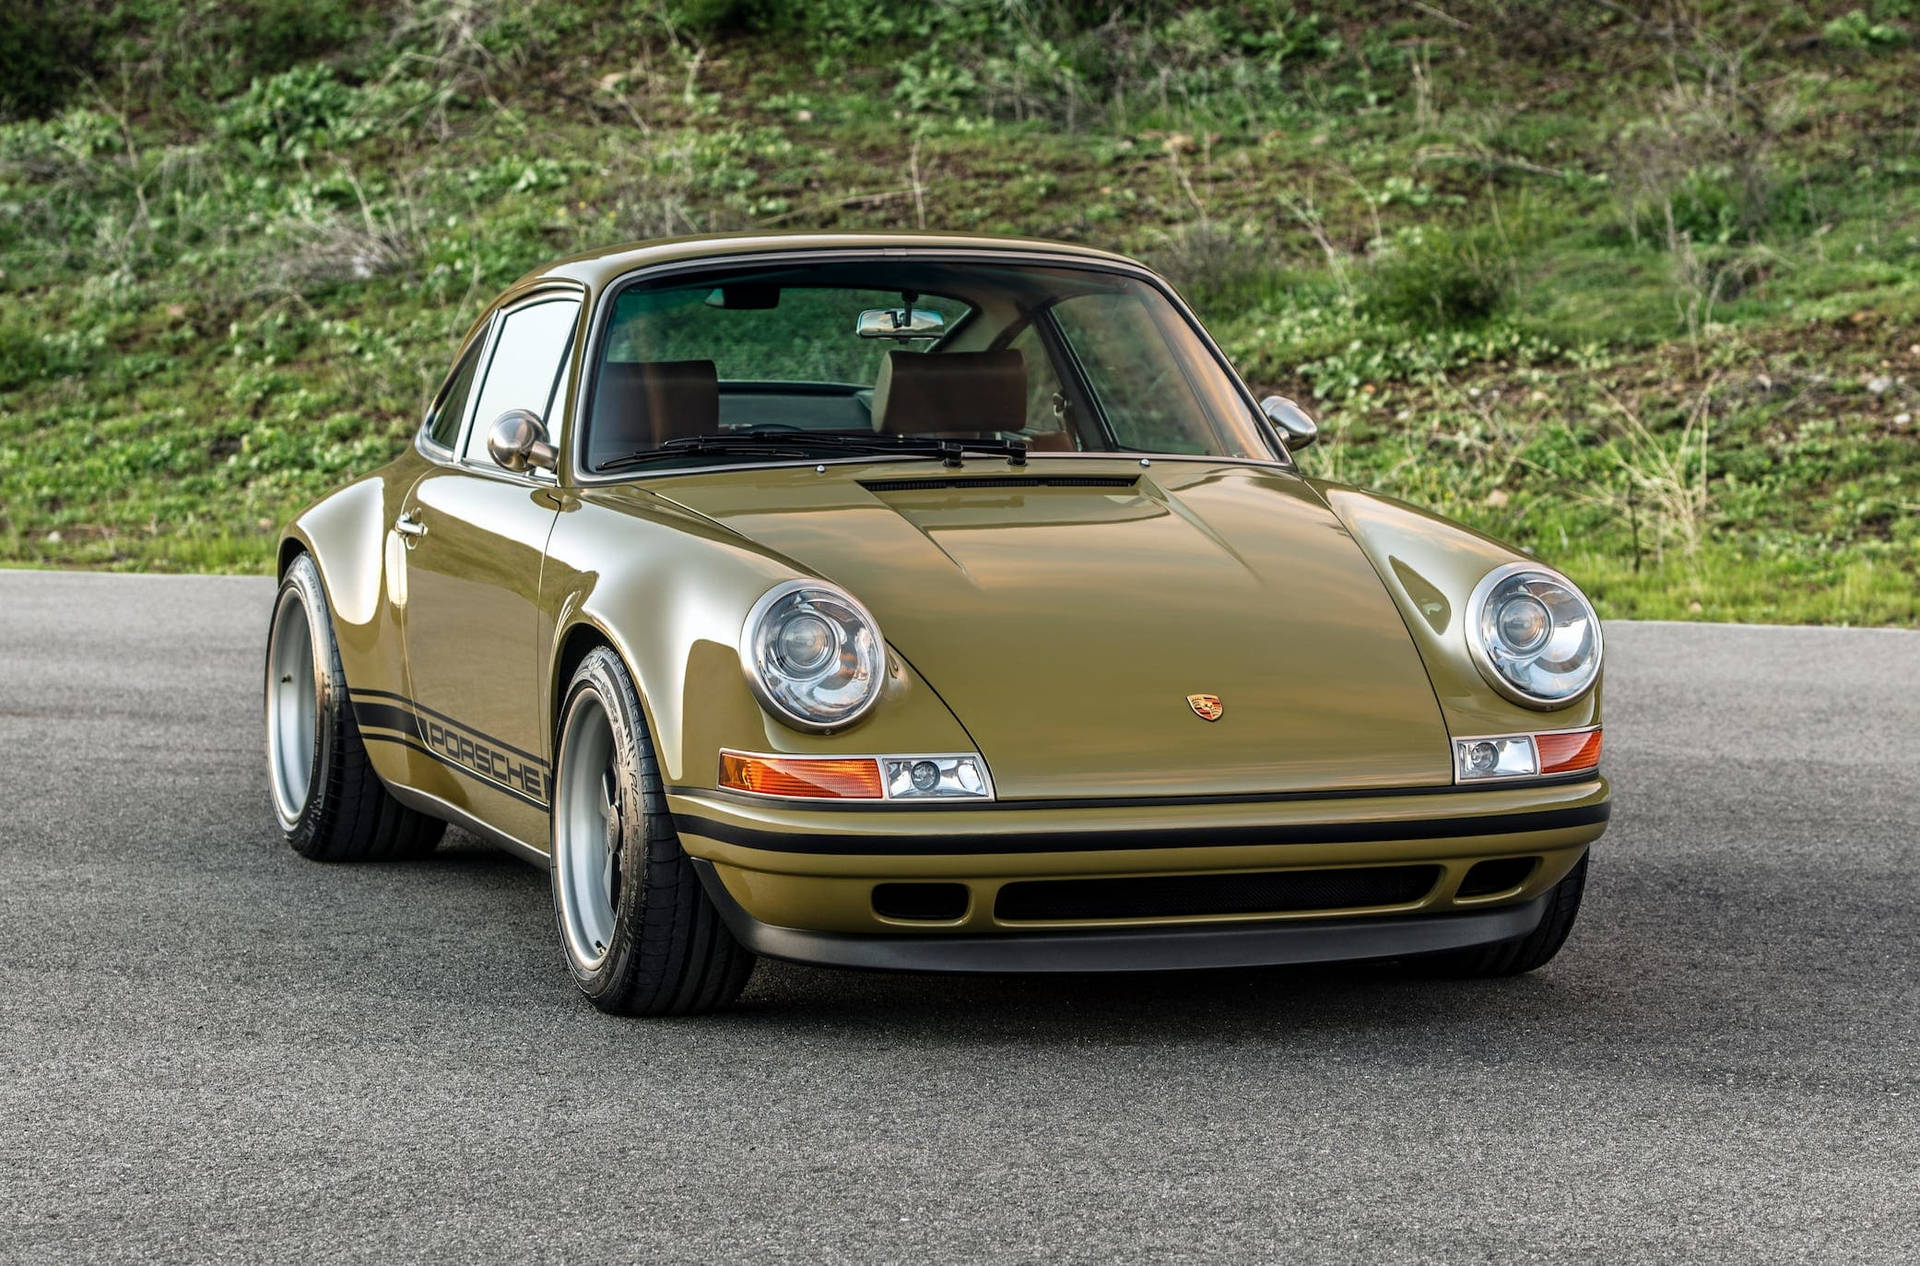 The Exquisite Olive-Brown Singer Porsche Showcased in its Full Glory Wallpaper